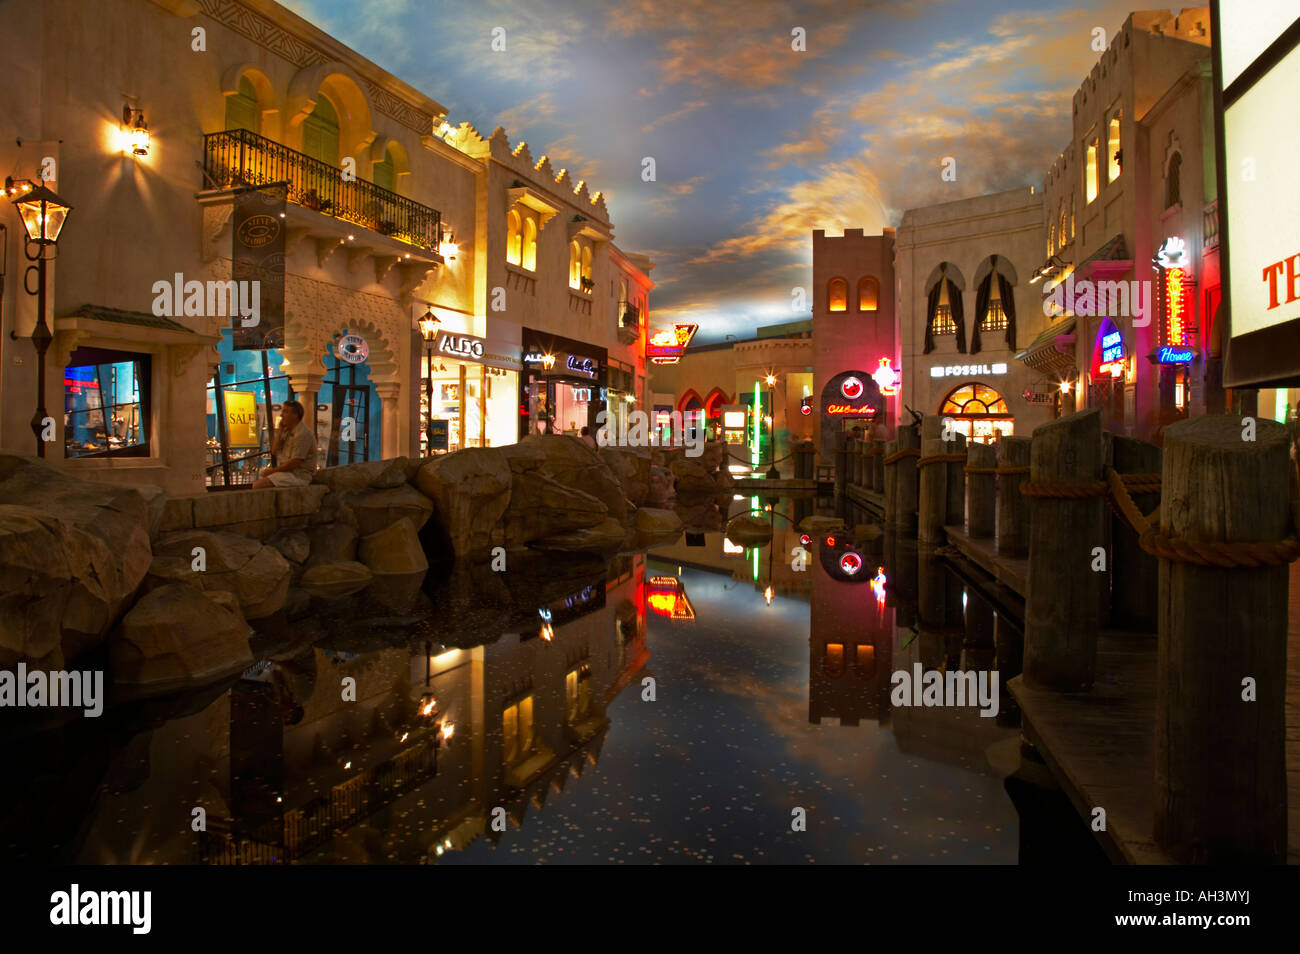 Shops in the shopping arcade at the Planet Hollywood Hotel, Las Vegas Stock  Photo - Alamy